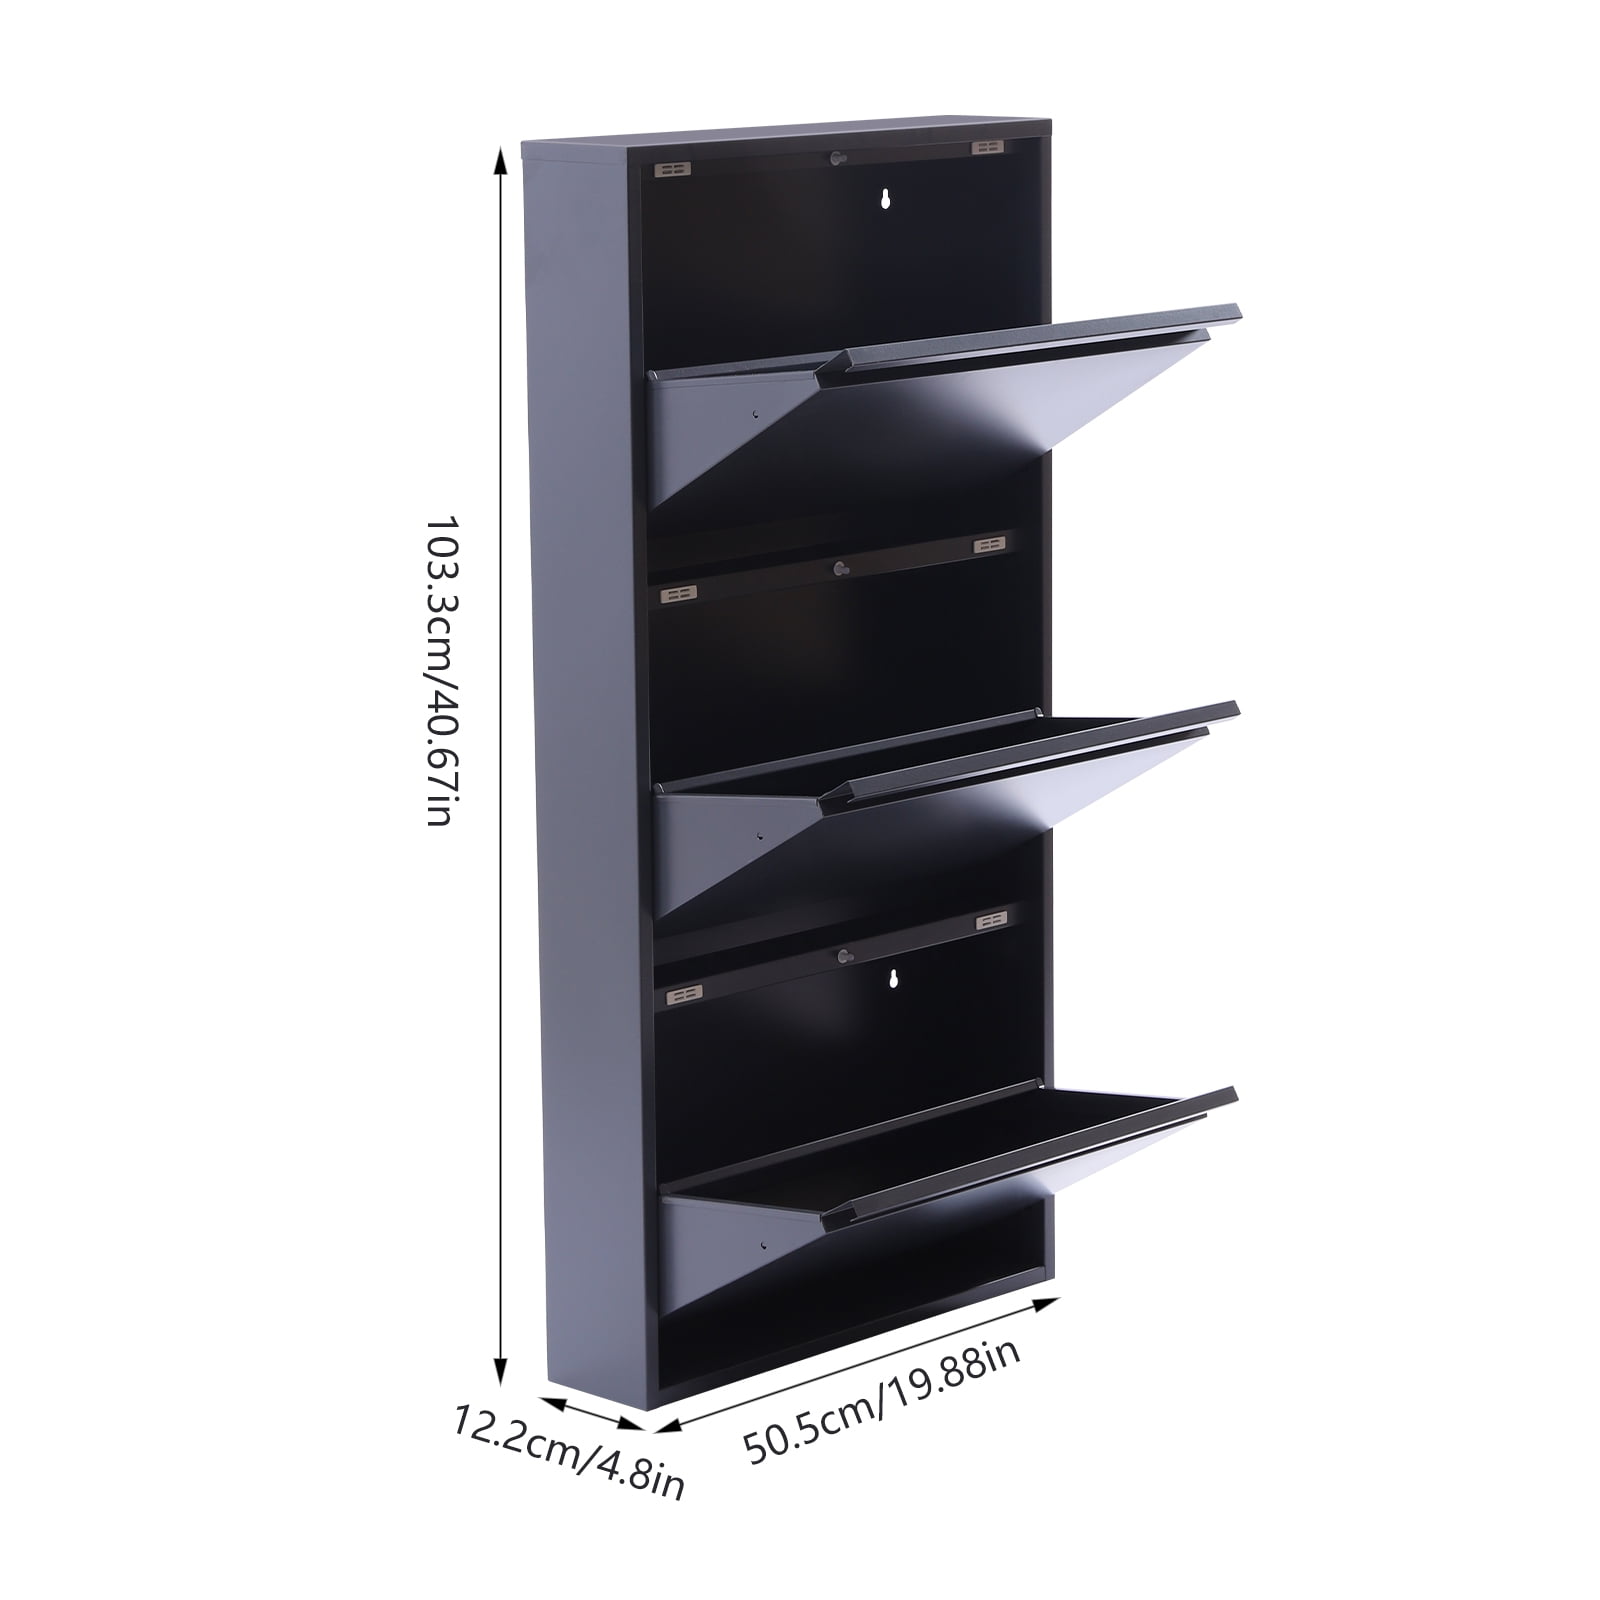 Black Narrow Shoe Storage Cabinet with 3 Shelves Wall Mounted in Large